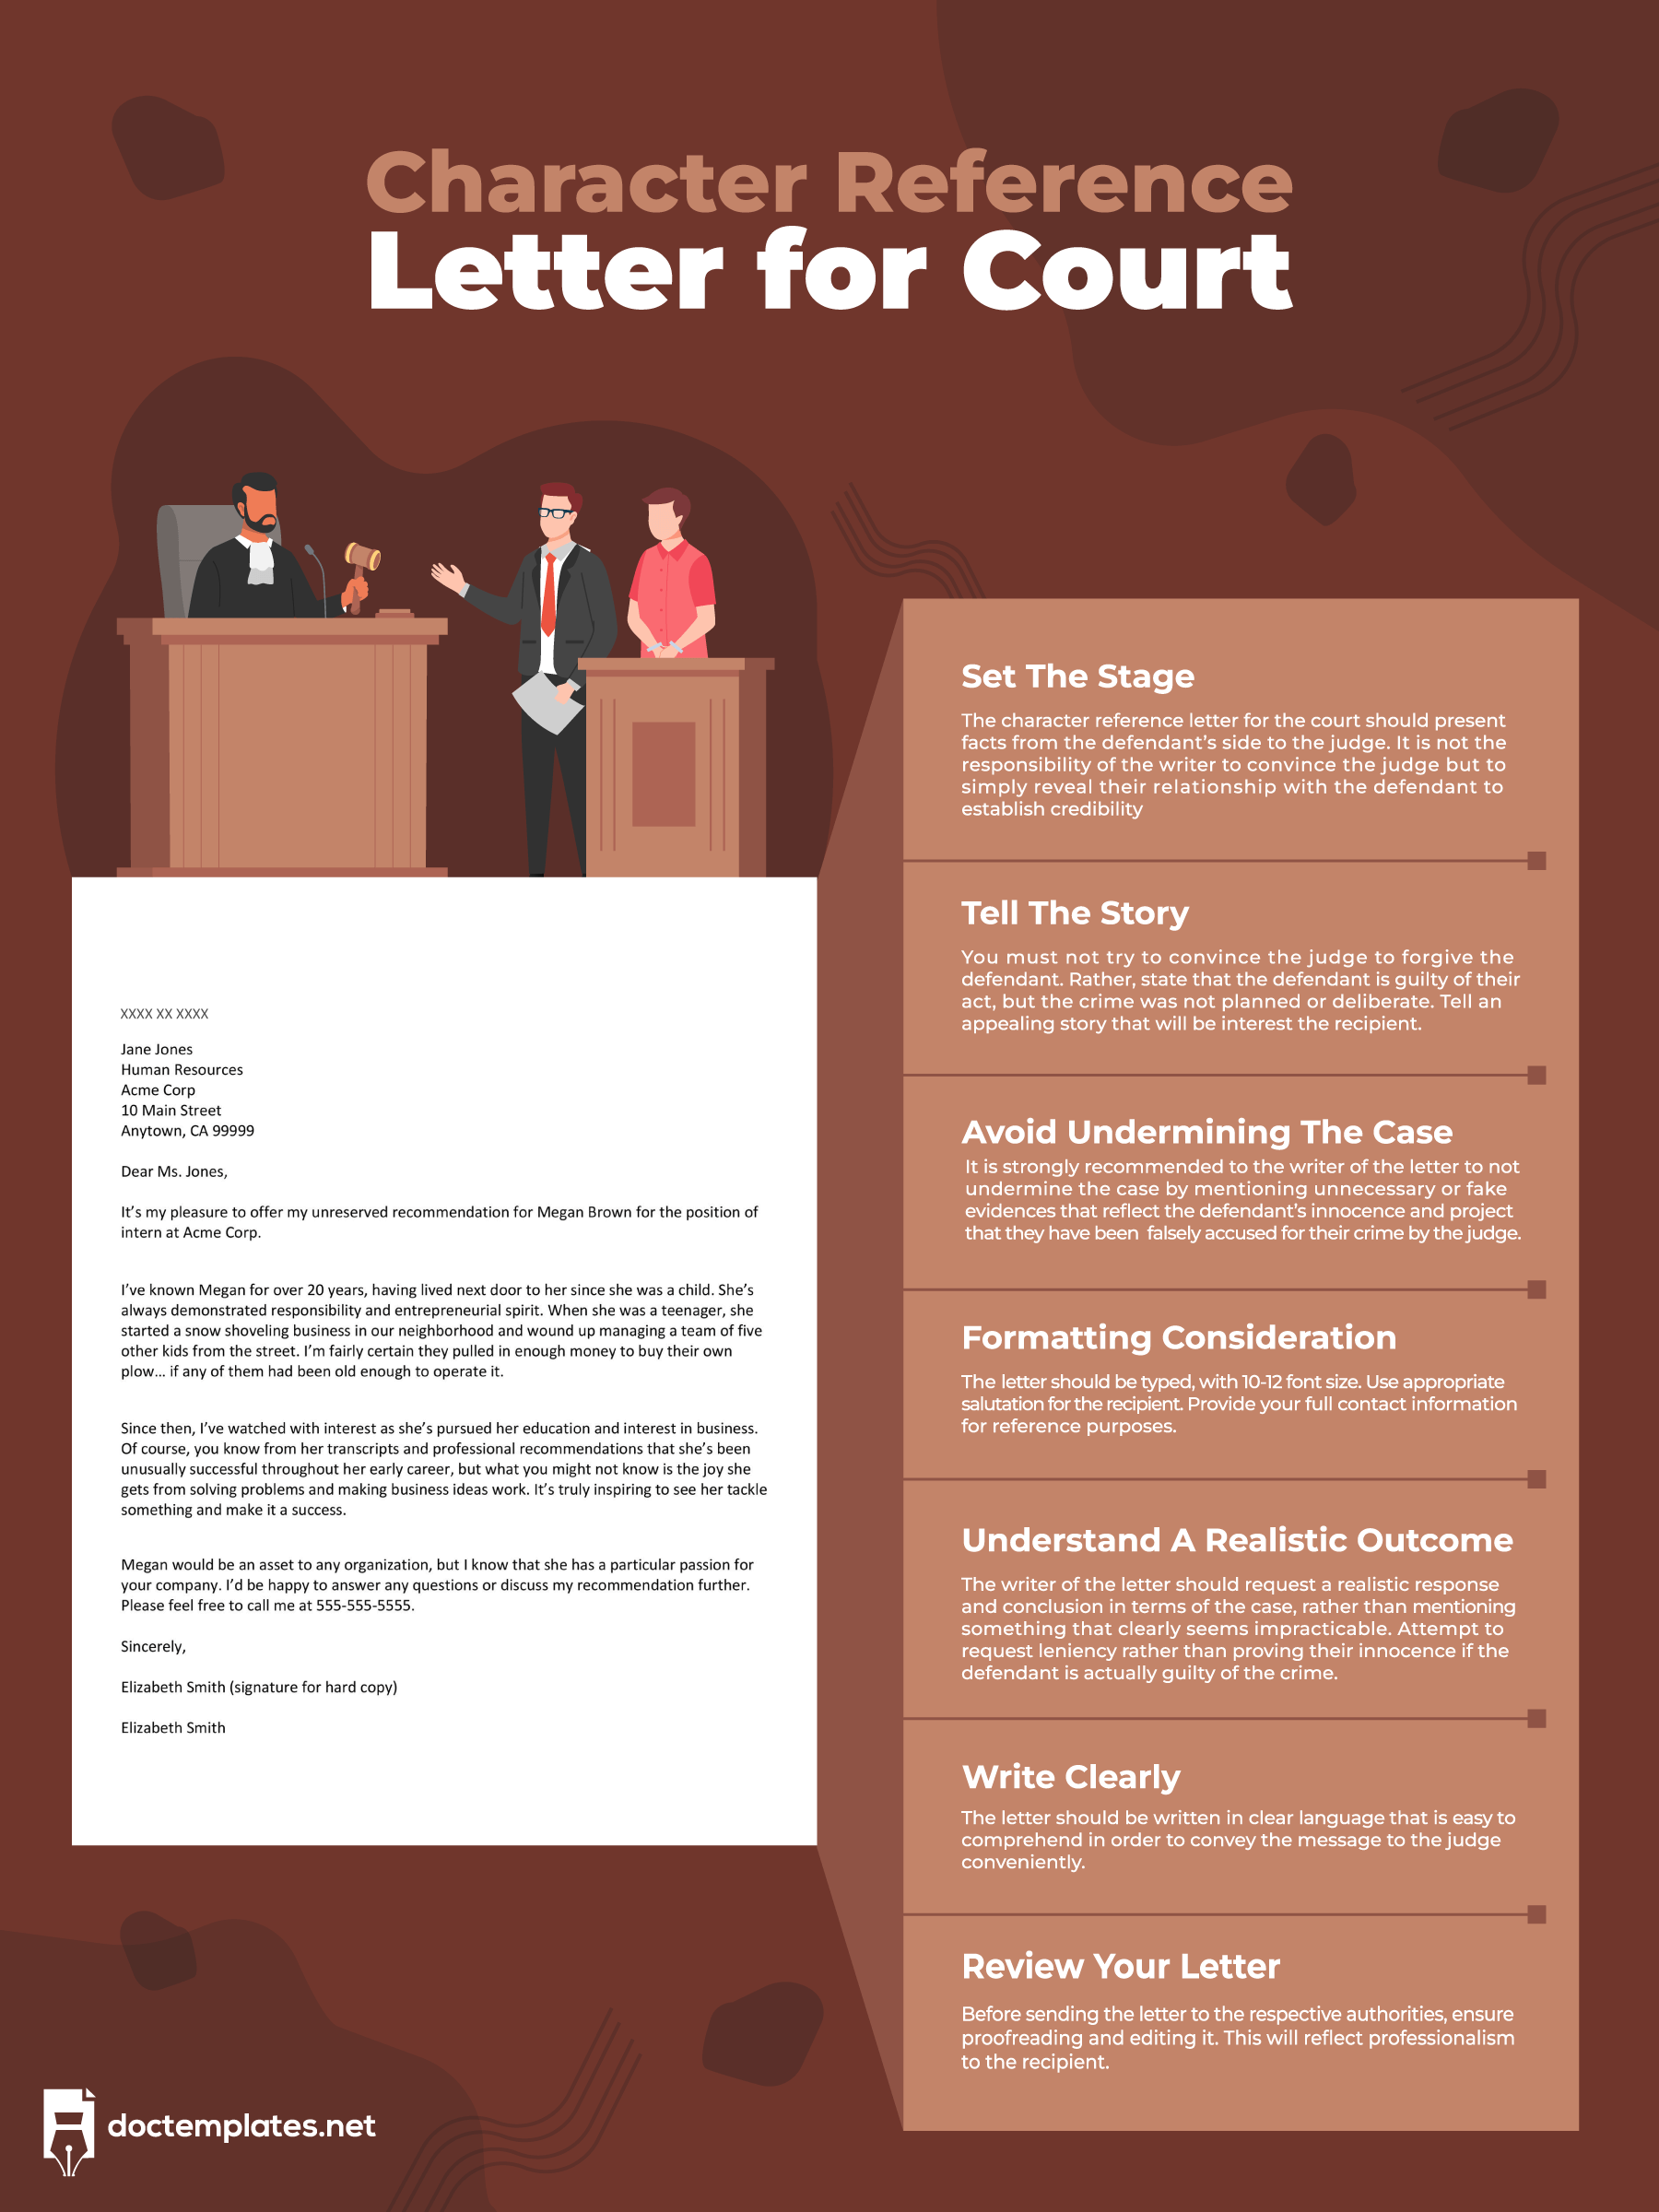 This infographic is about court character reference letter.